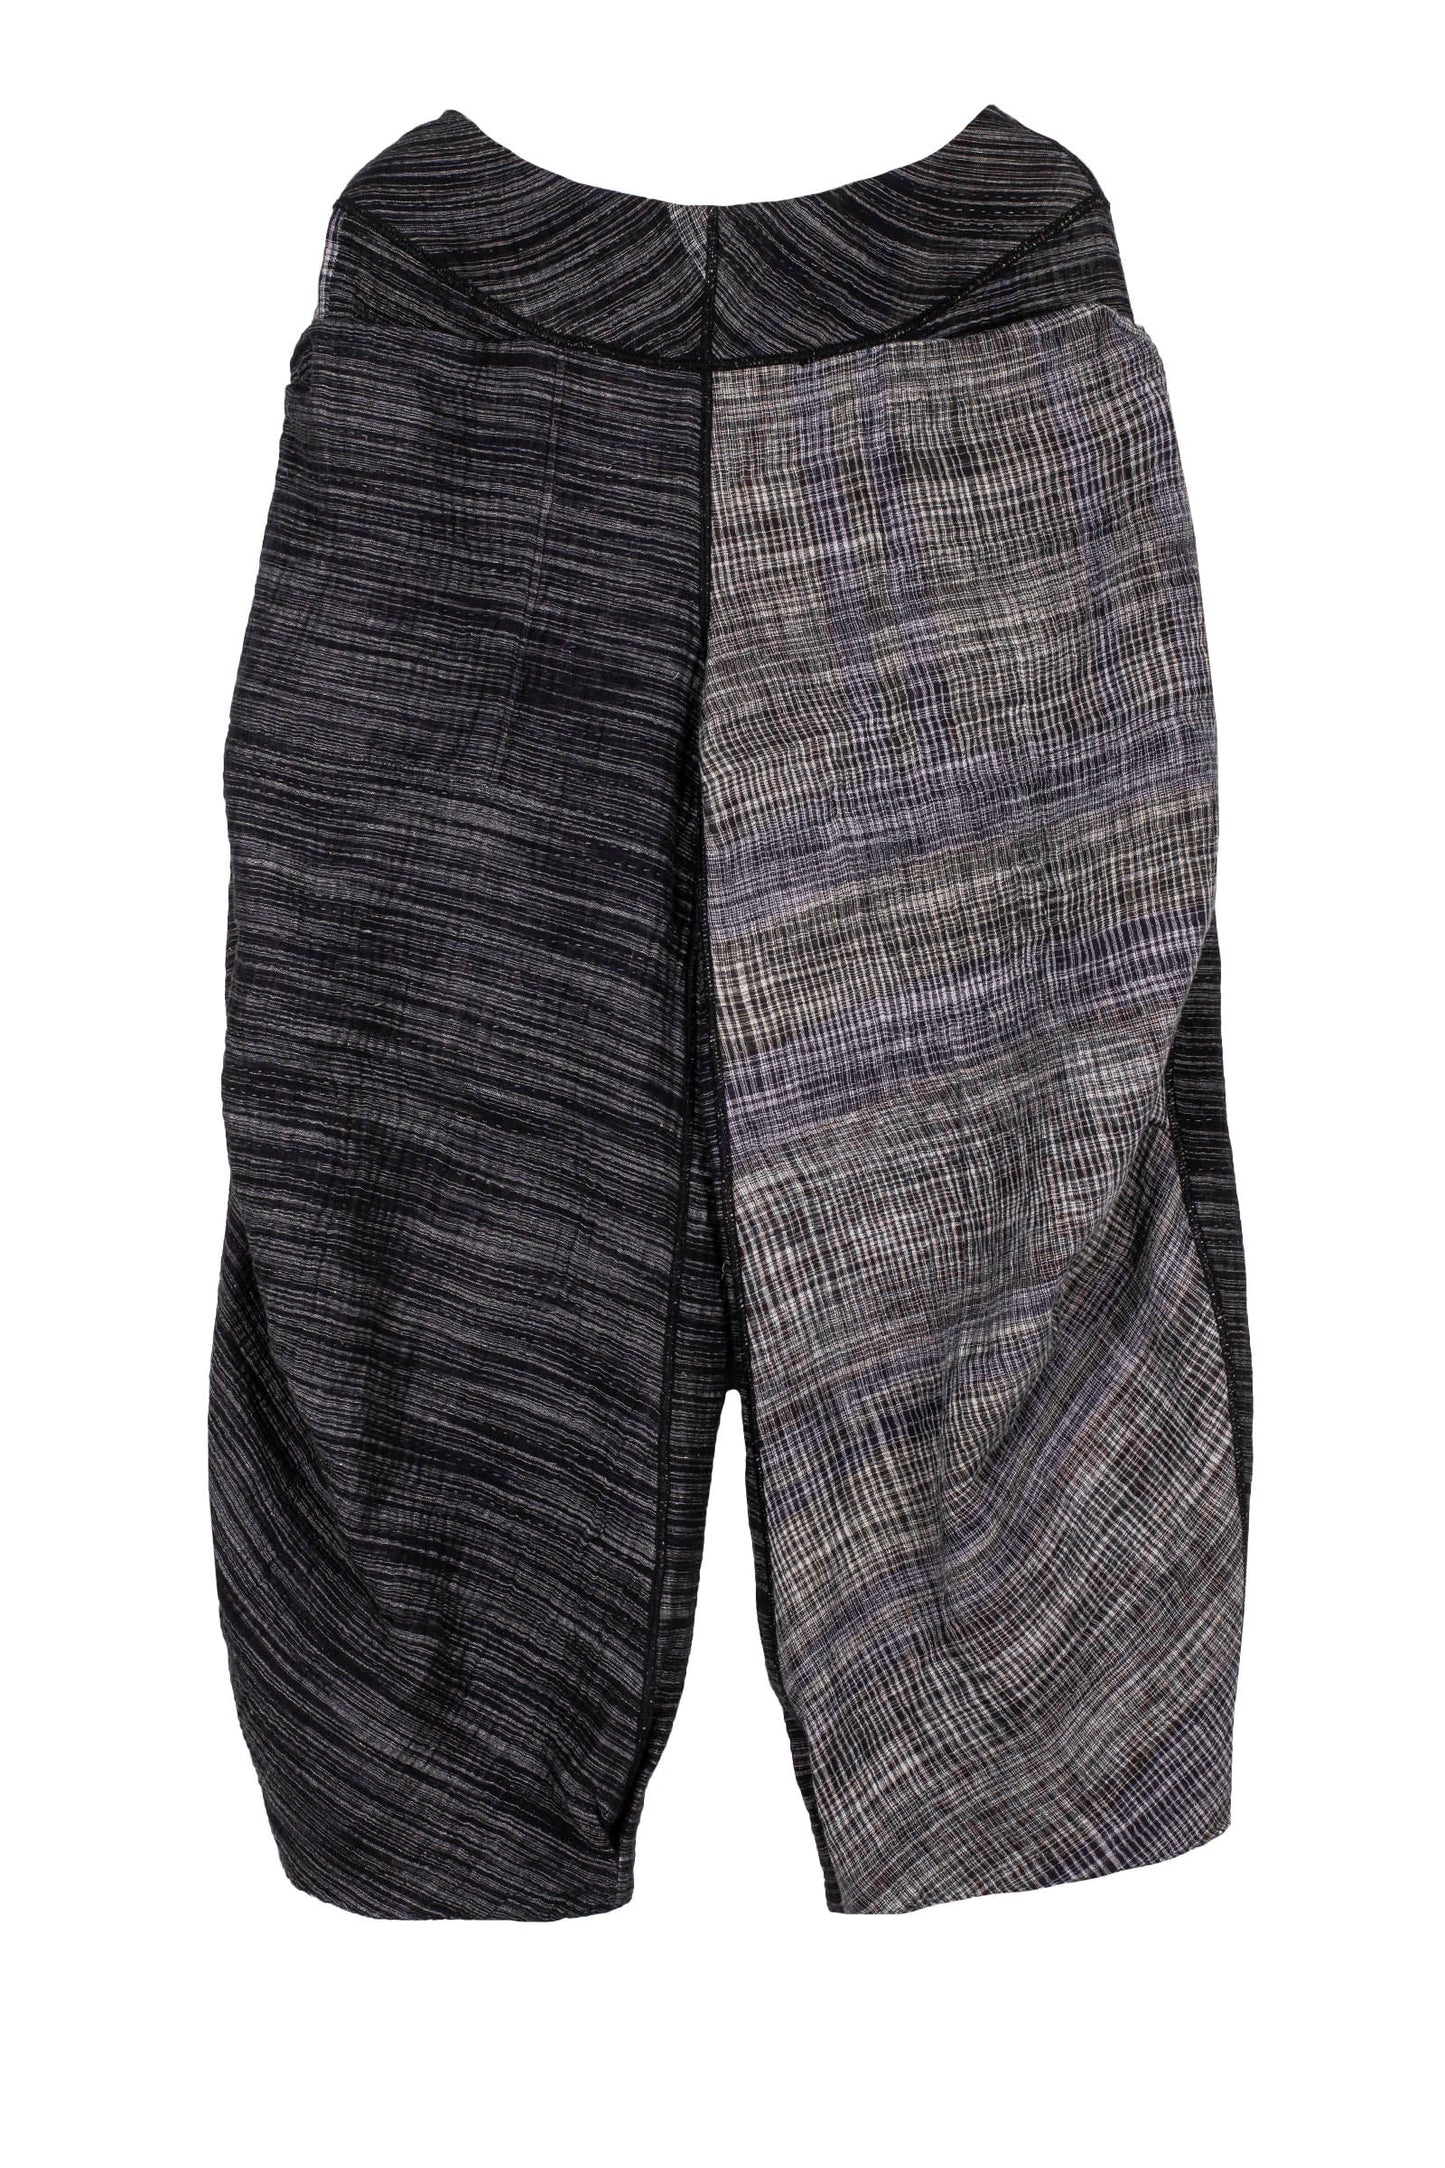 WOVEN IKAT & FRAYED PATCH KANTHA  KNEE TUCKED PANTS - wk4625-gry -